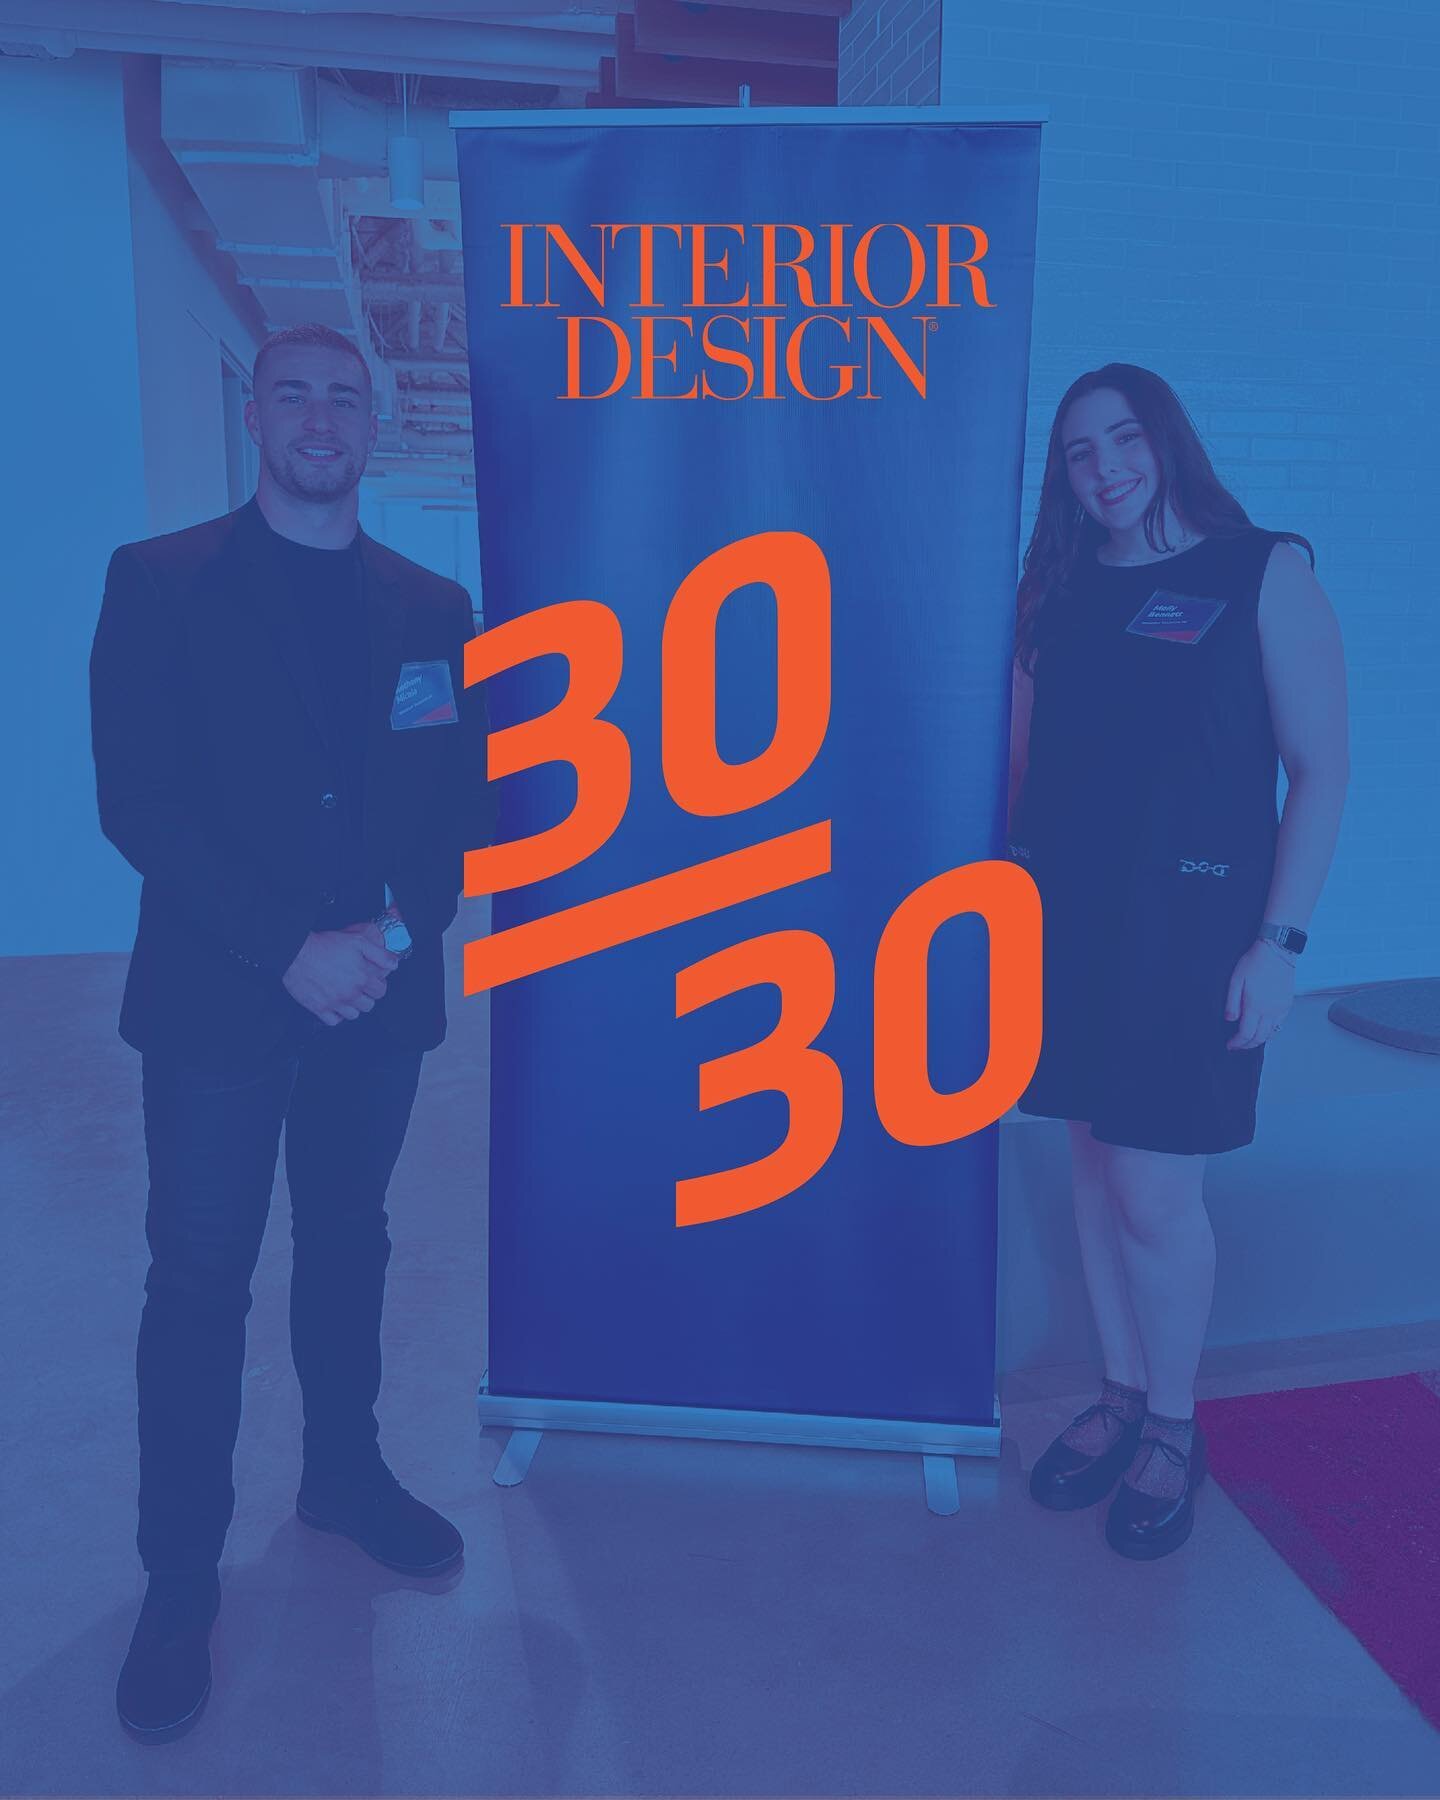 Congratulations to Molly Bennett &amp; Anthony Micela who have been recognized as two of Boston&rsquo;s Top 30 Designers under 30 by Interior Design Magazine.

Thank you @interiordesignmag &amp; @ajparon for a wonderful event! 
.
.
.
#touloukiantoulo